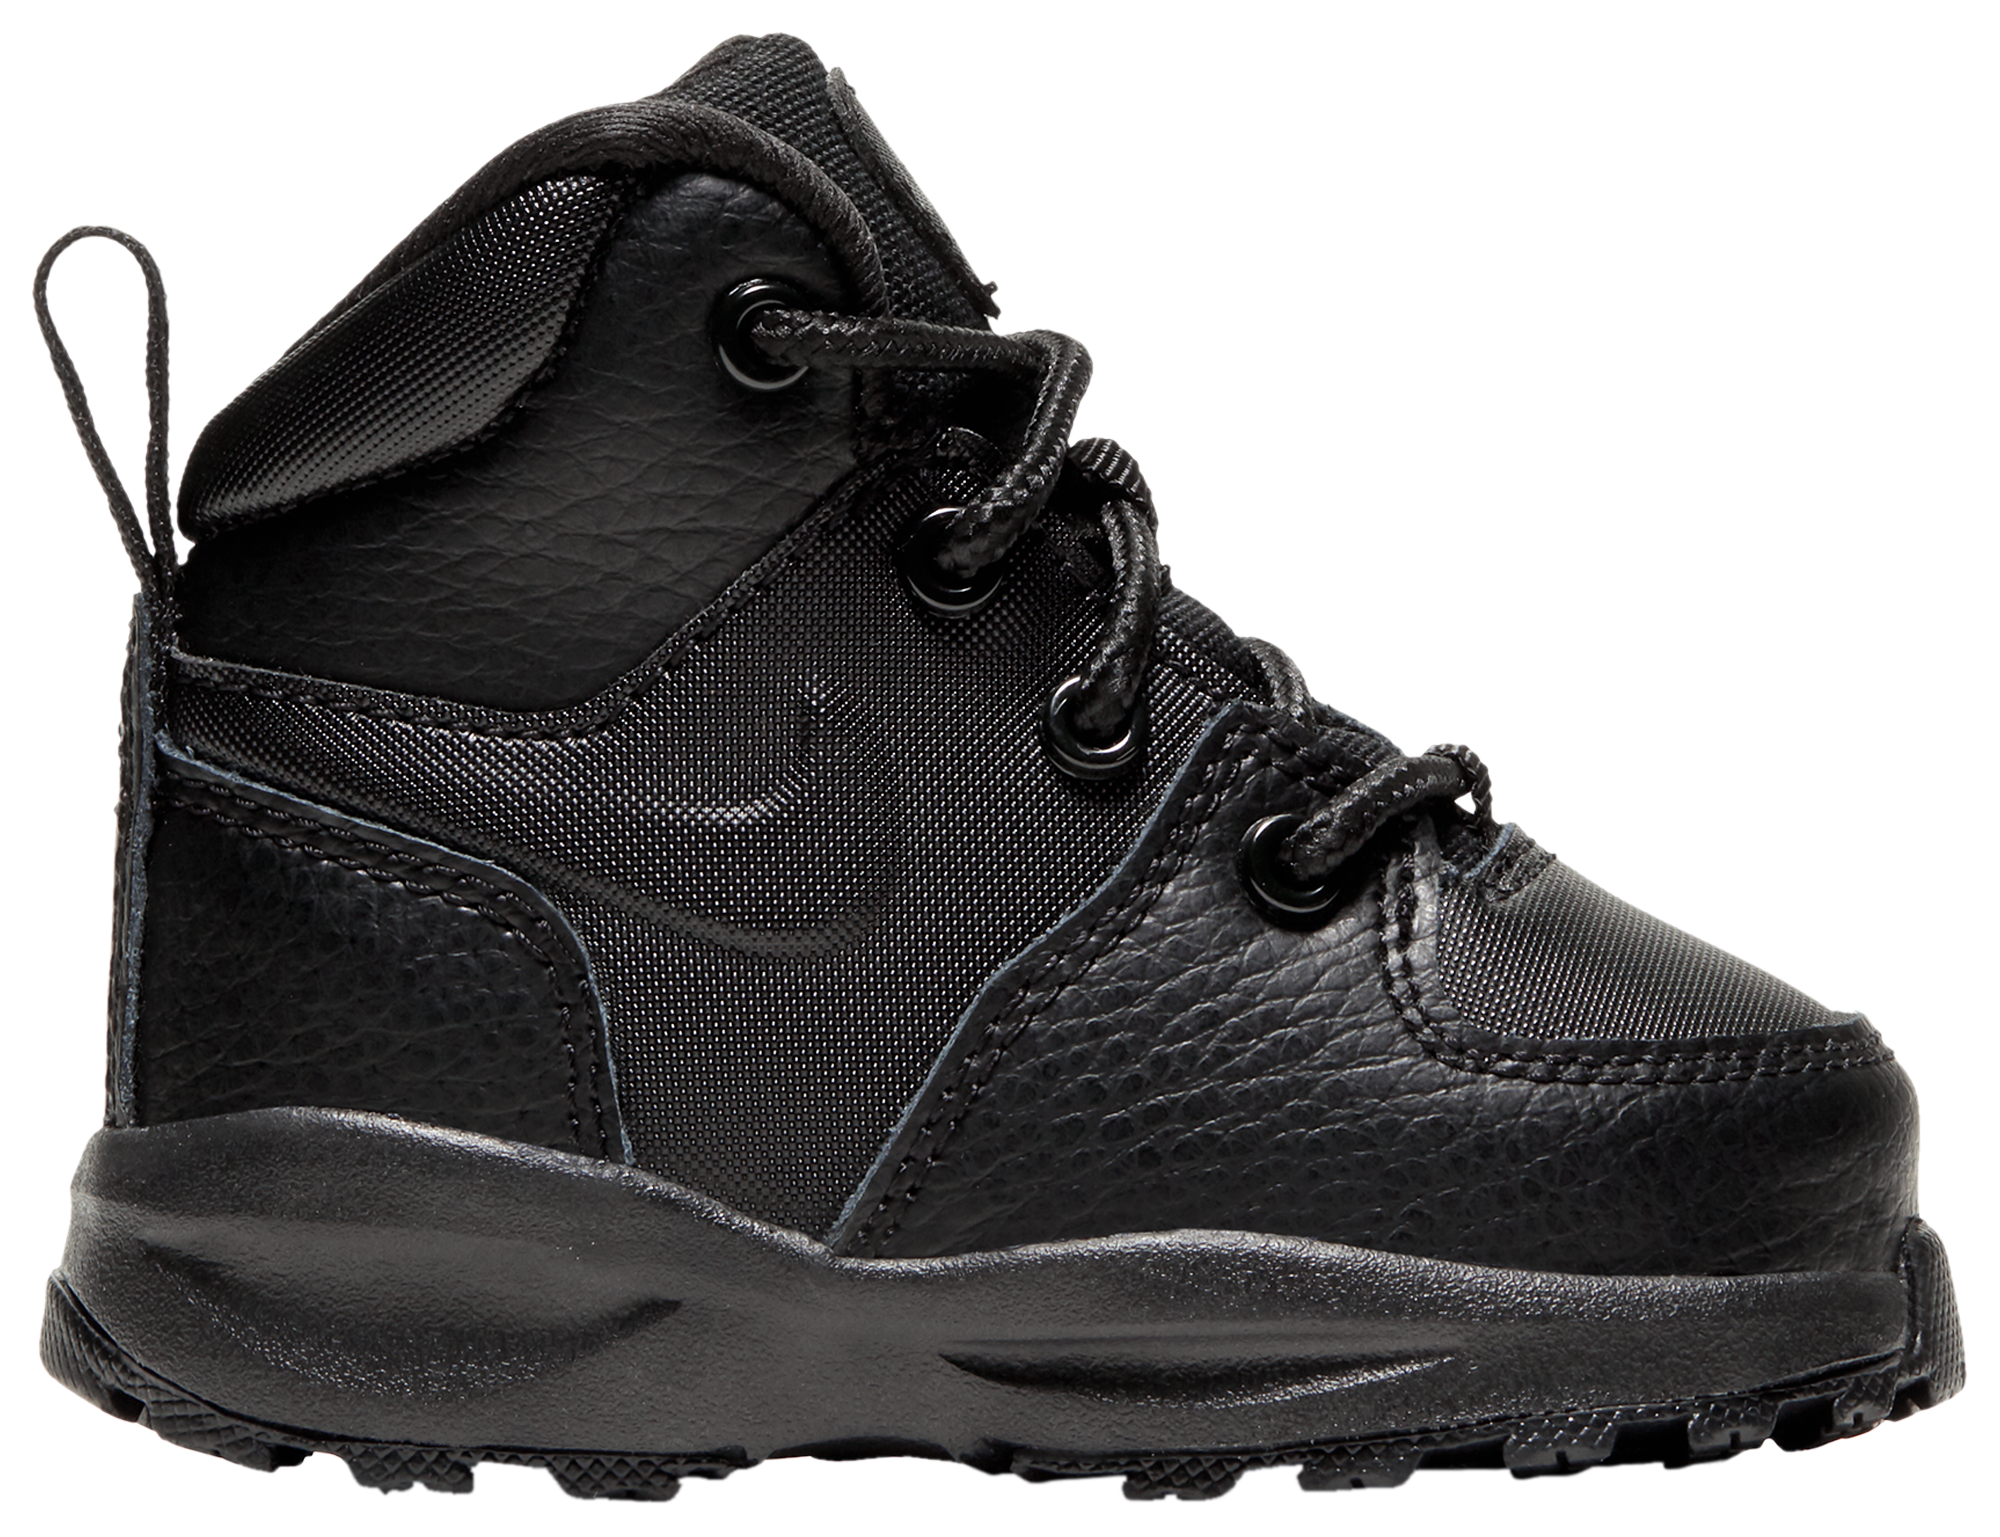 eastbay nike boots